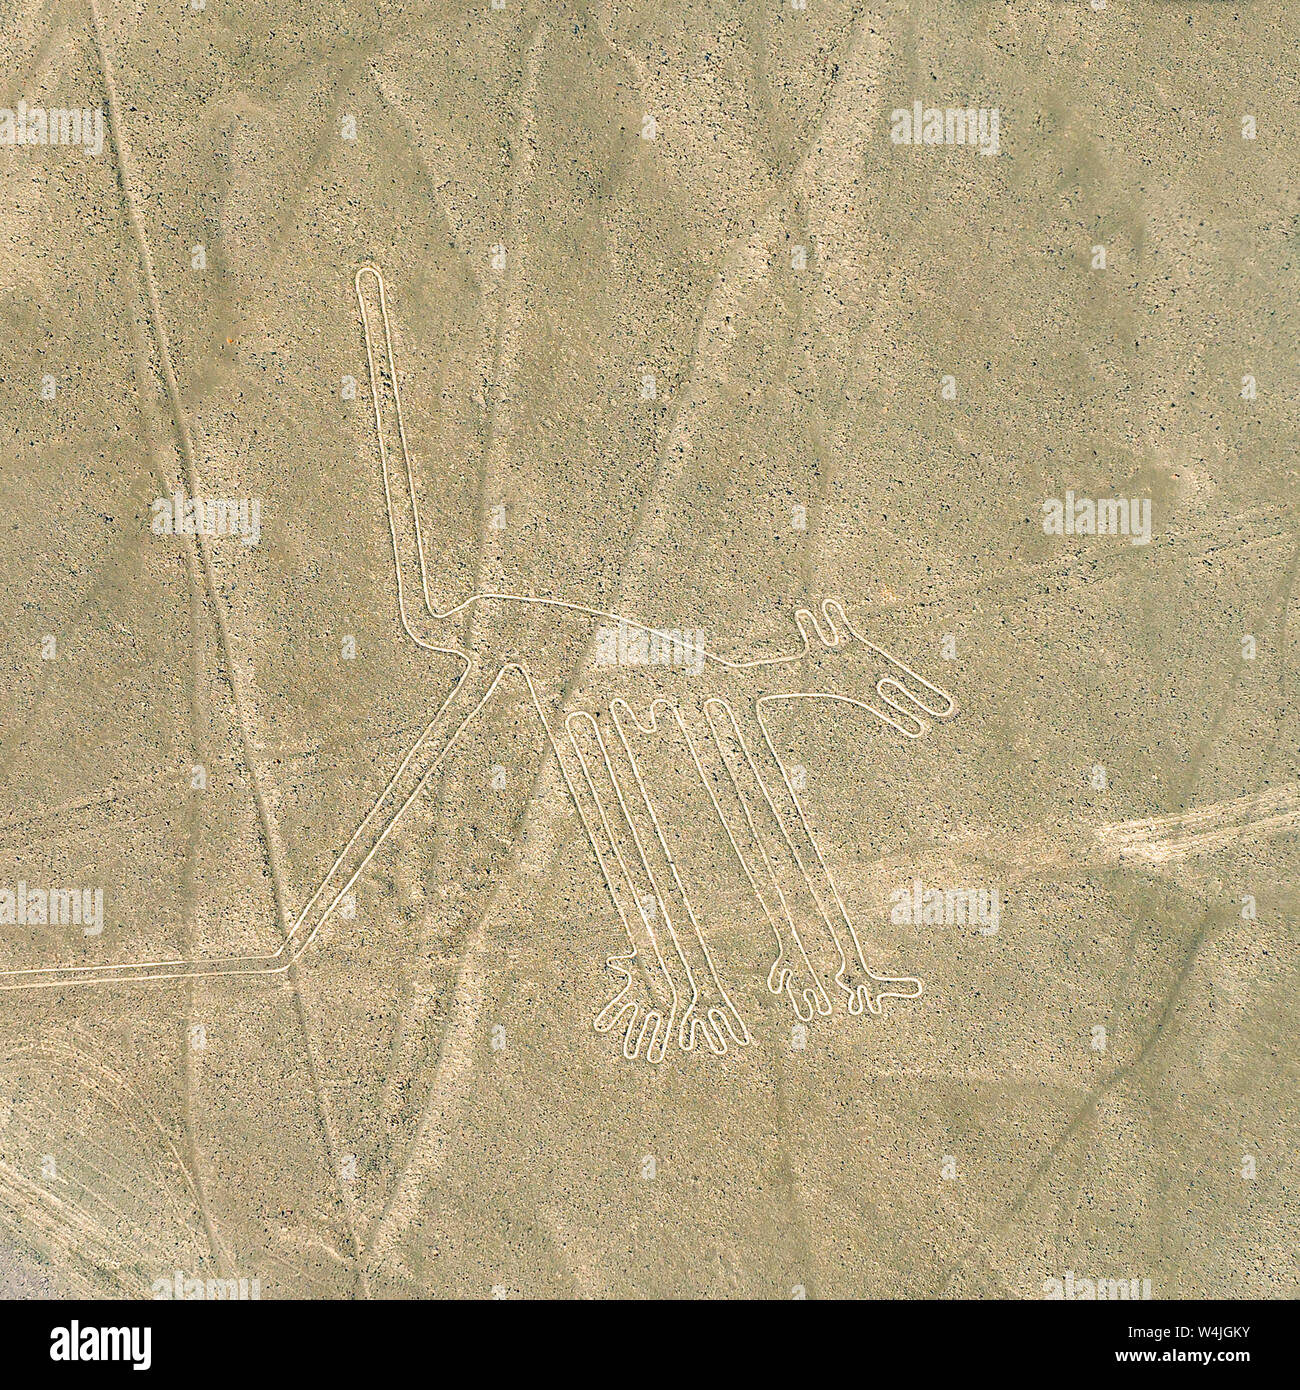 The dog geoglyph drawing pattern in the peruvian desert known as the Nazca Lines near Nazca, Peru. Stock Photo